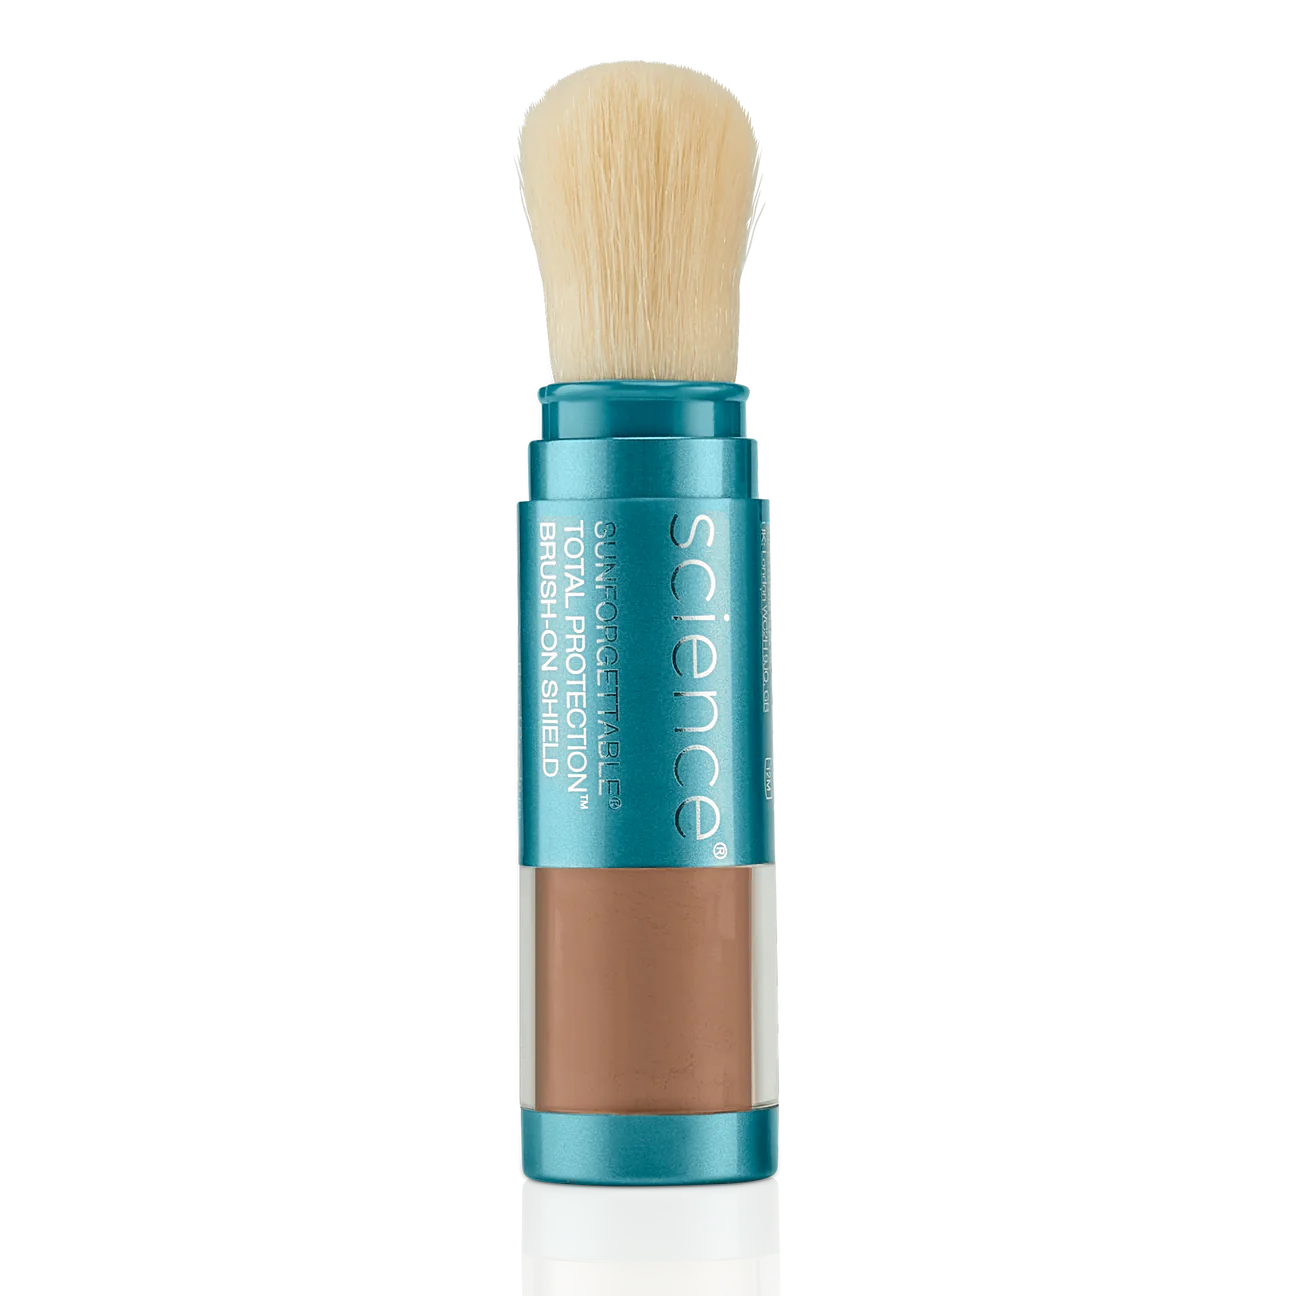 Colorescience Sunforgettable Total Protection Brush-On Shield SPF 50 in Deep